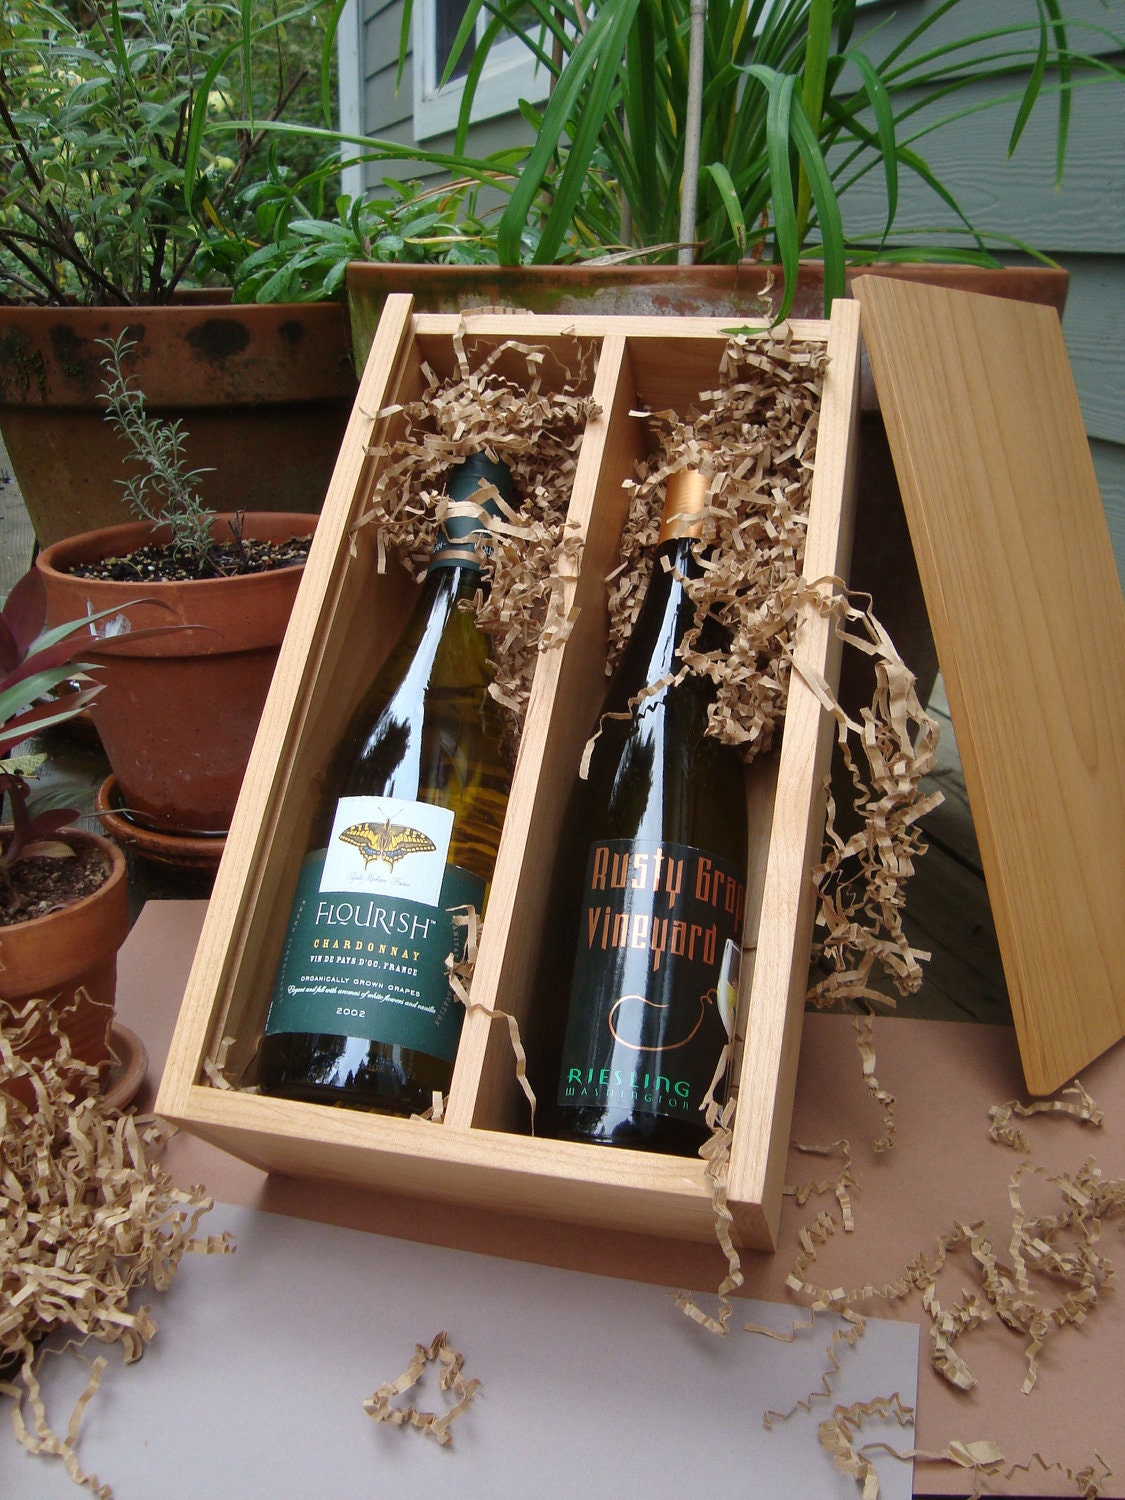 Personalized wood wine box - wedding gift - groomsmen gift - in alder wood - sized for two wine bottles